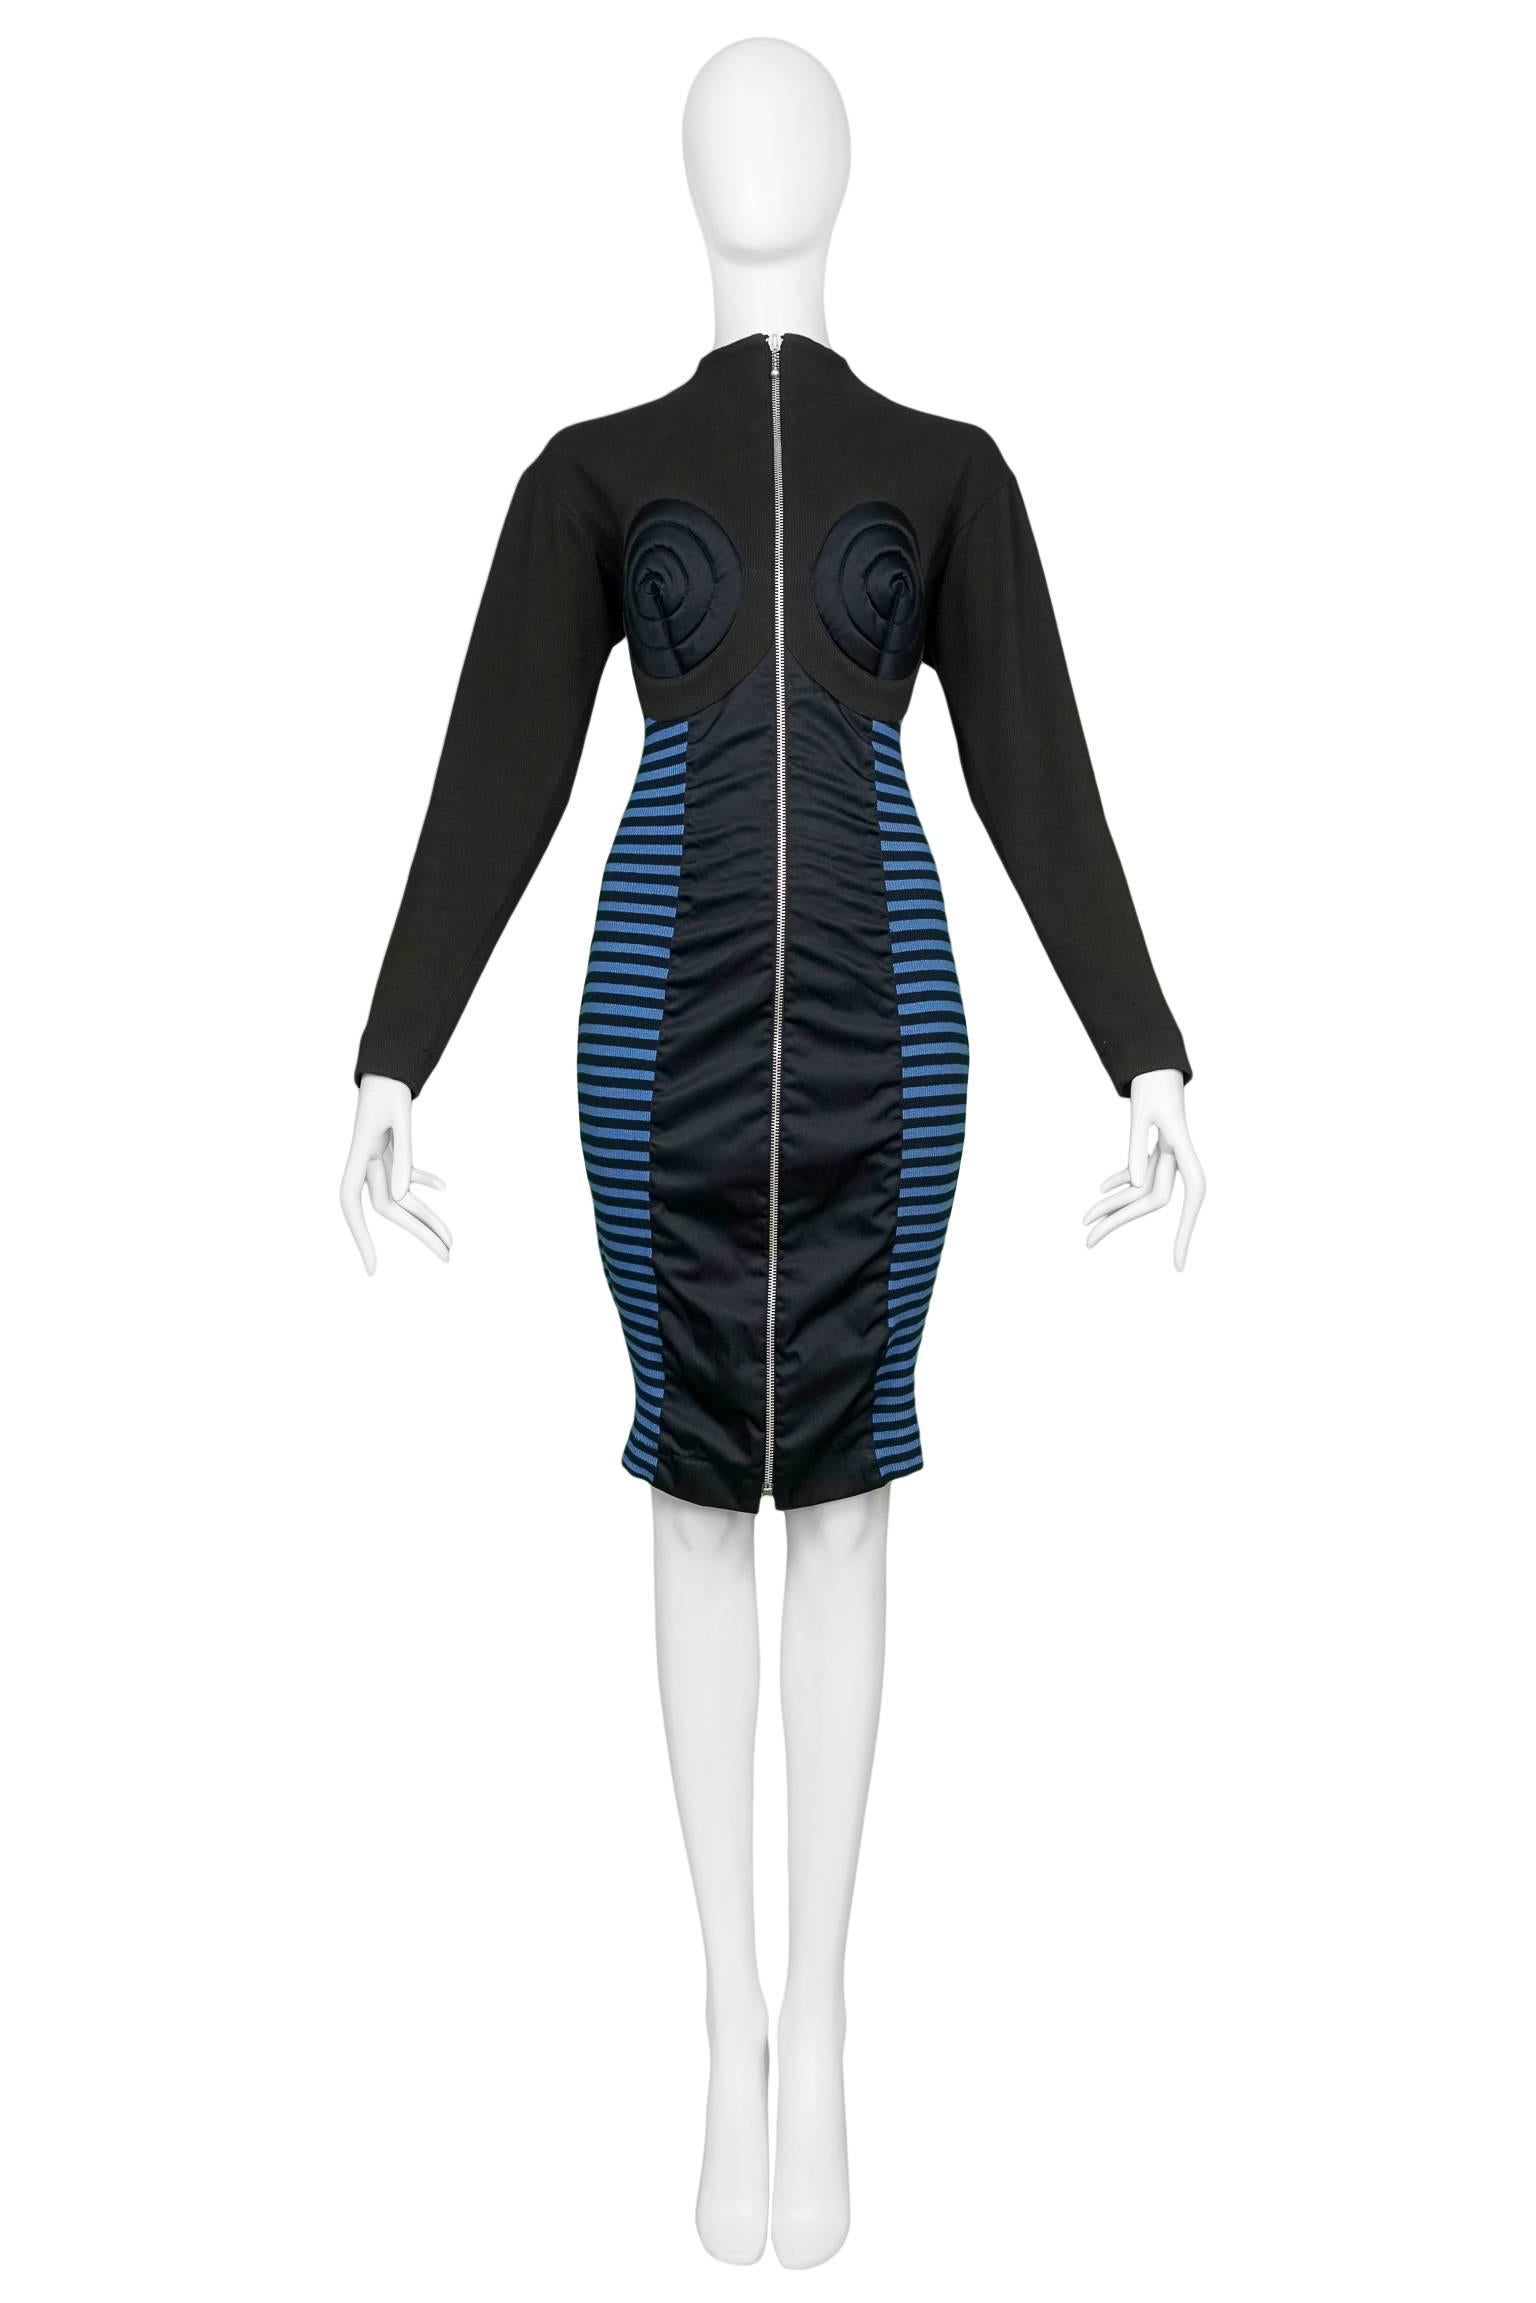 Vintage Jean Paul Gaultier  zipper front bustier dress featuring ribbed cotton paneling, padded bullet bra detailing at the bust, blue and black horizontal stripes at the sides and red iconic constructivist letters at either side.